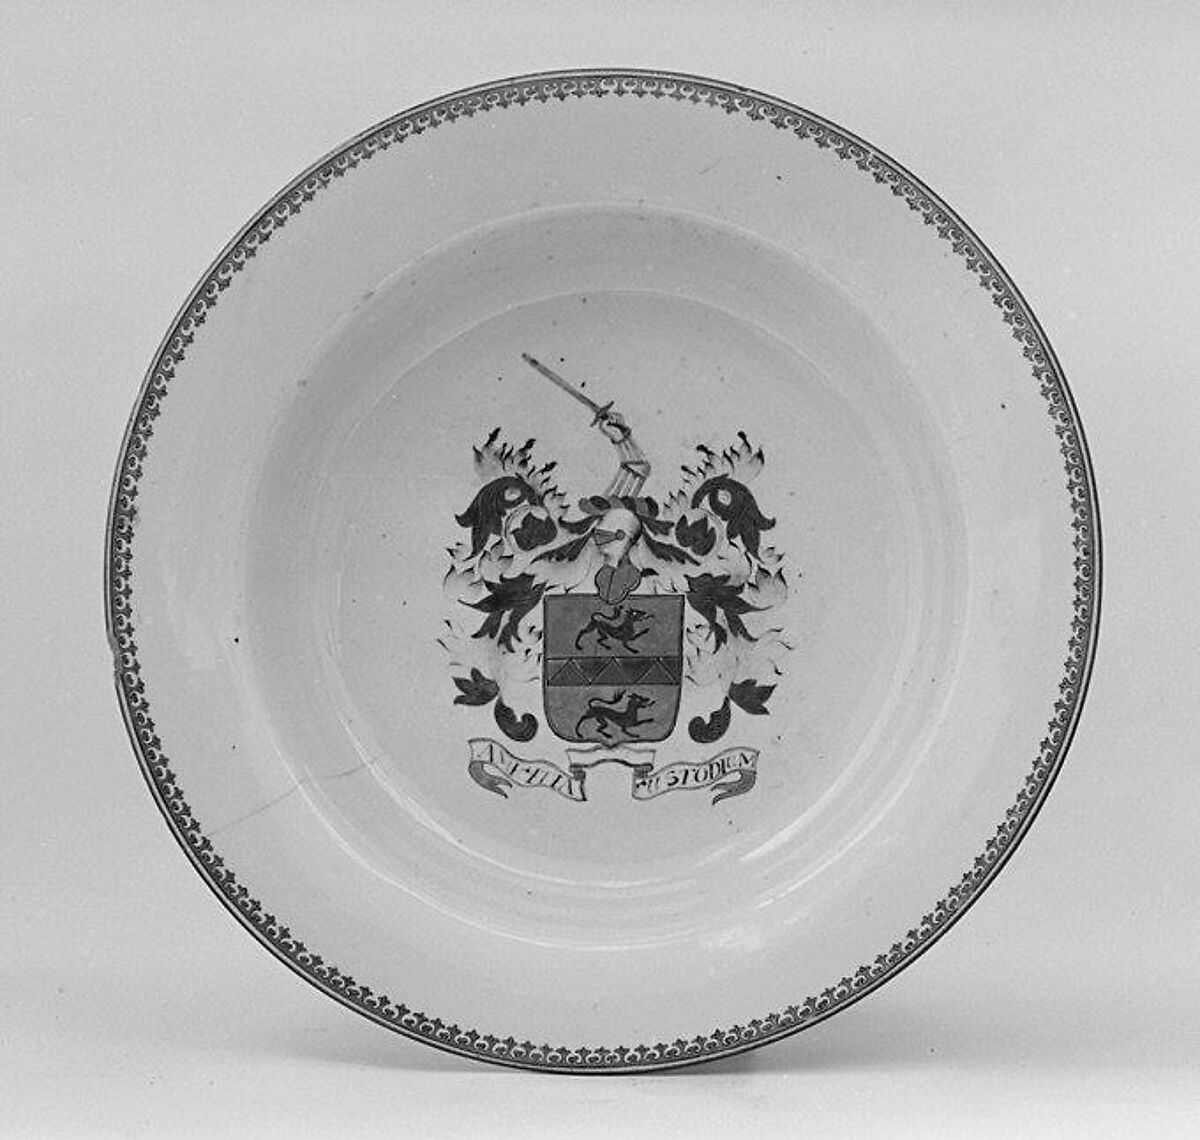 Dish, Hard-paste porcelain, Chinese, for Continental European market 